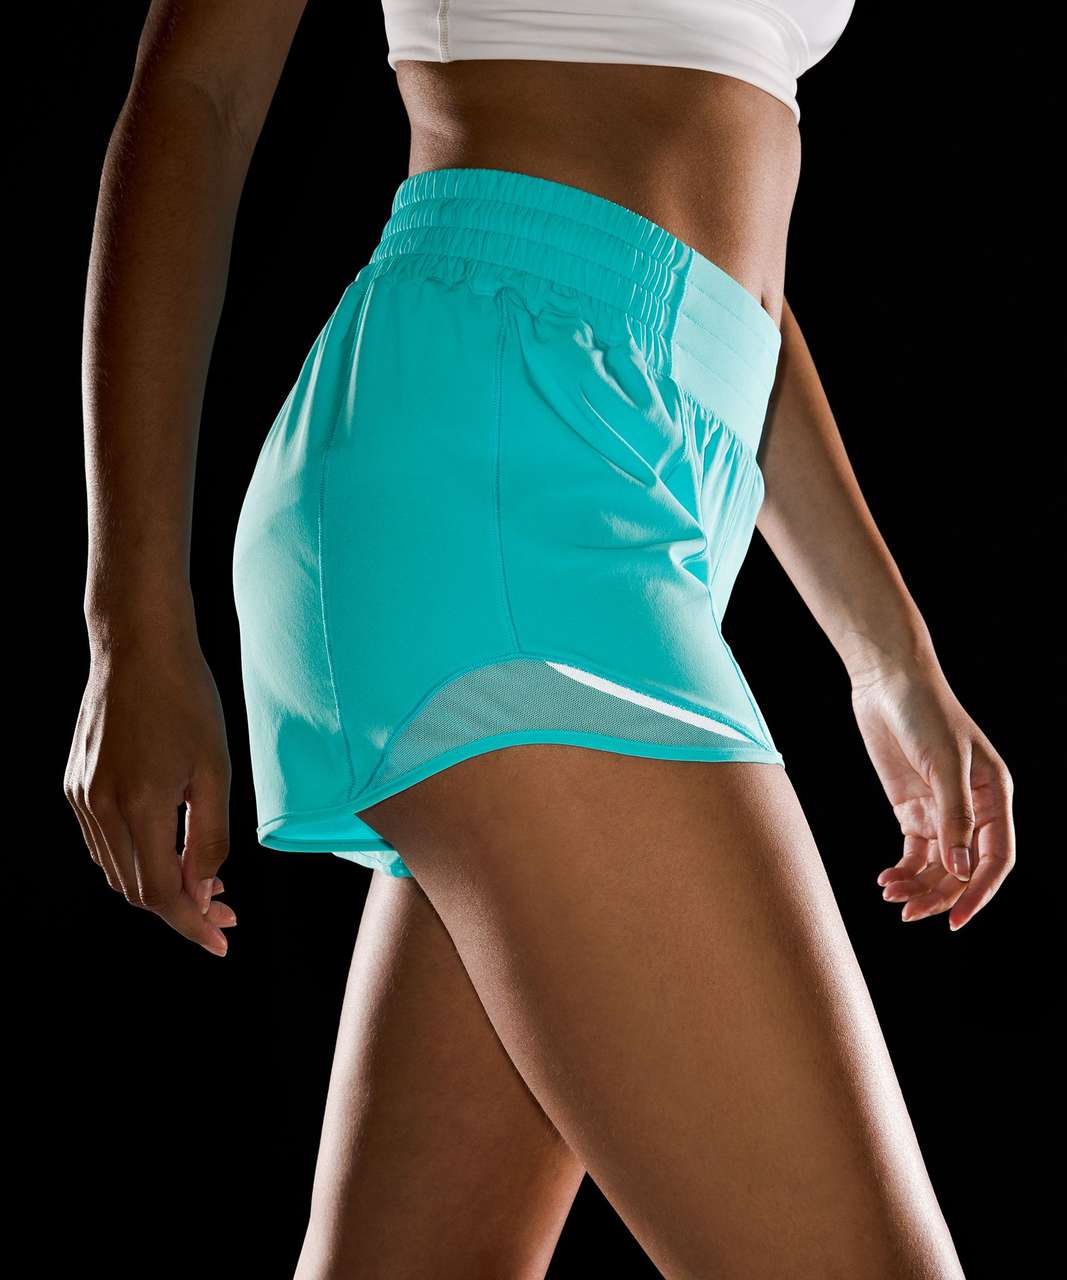 Lululemon Hotty Hot High-Rise Lined Short 4" - Electric Turquoise